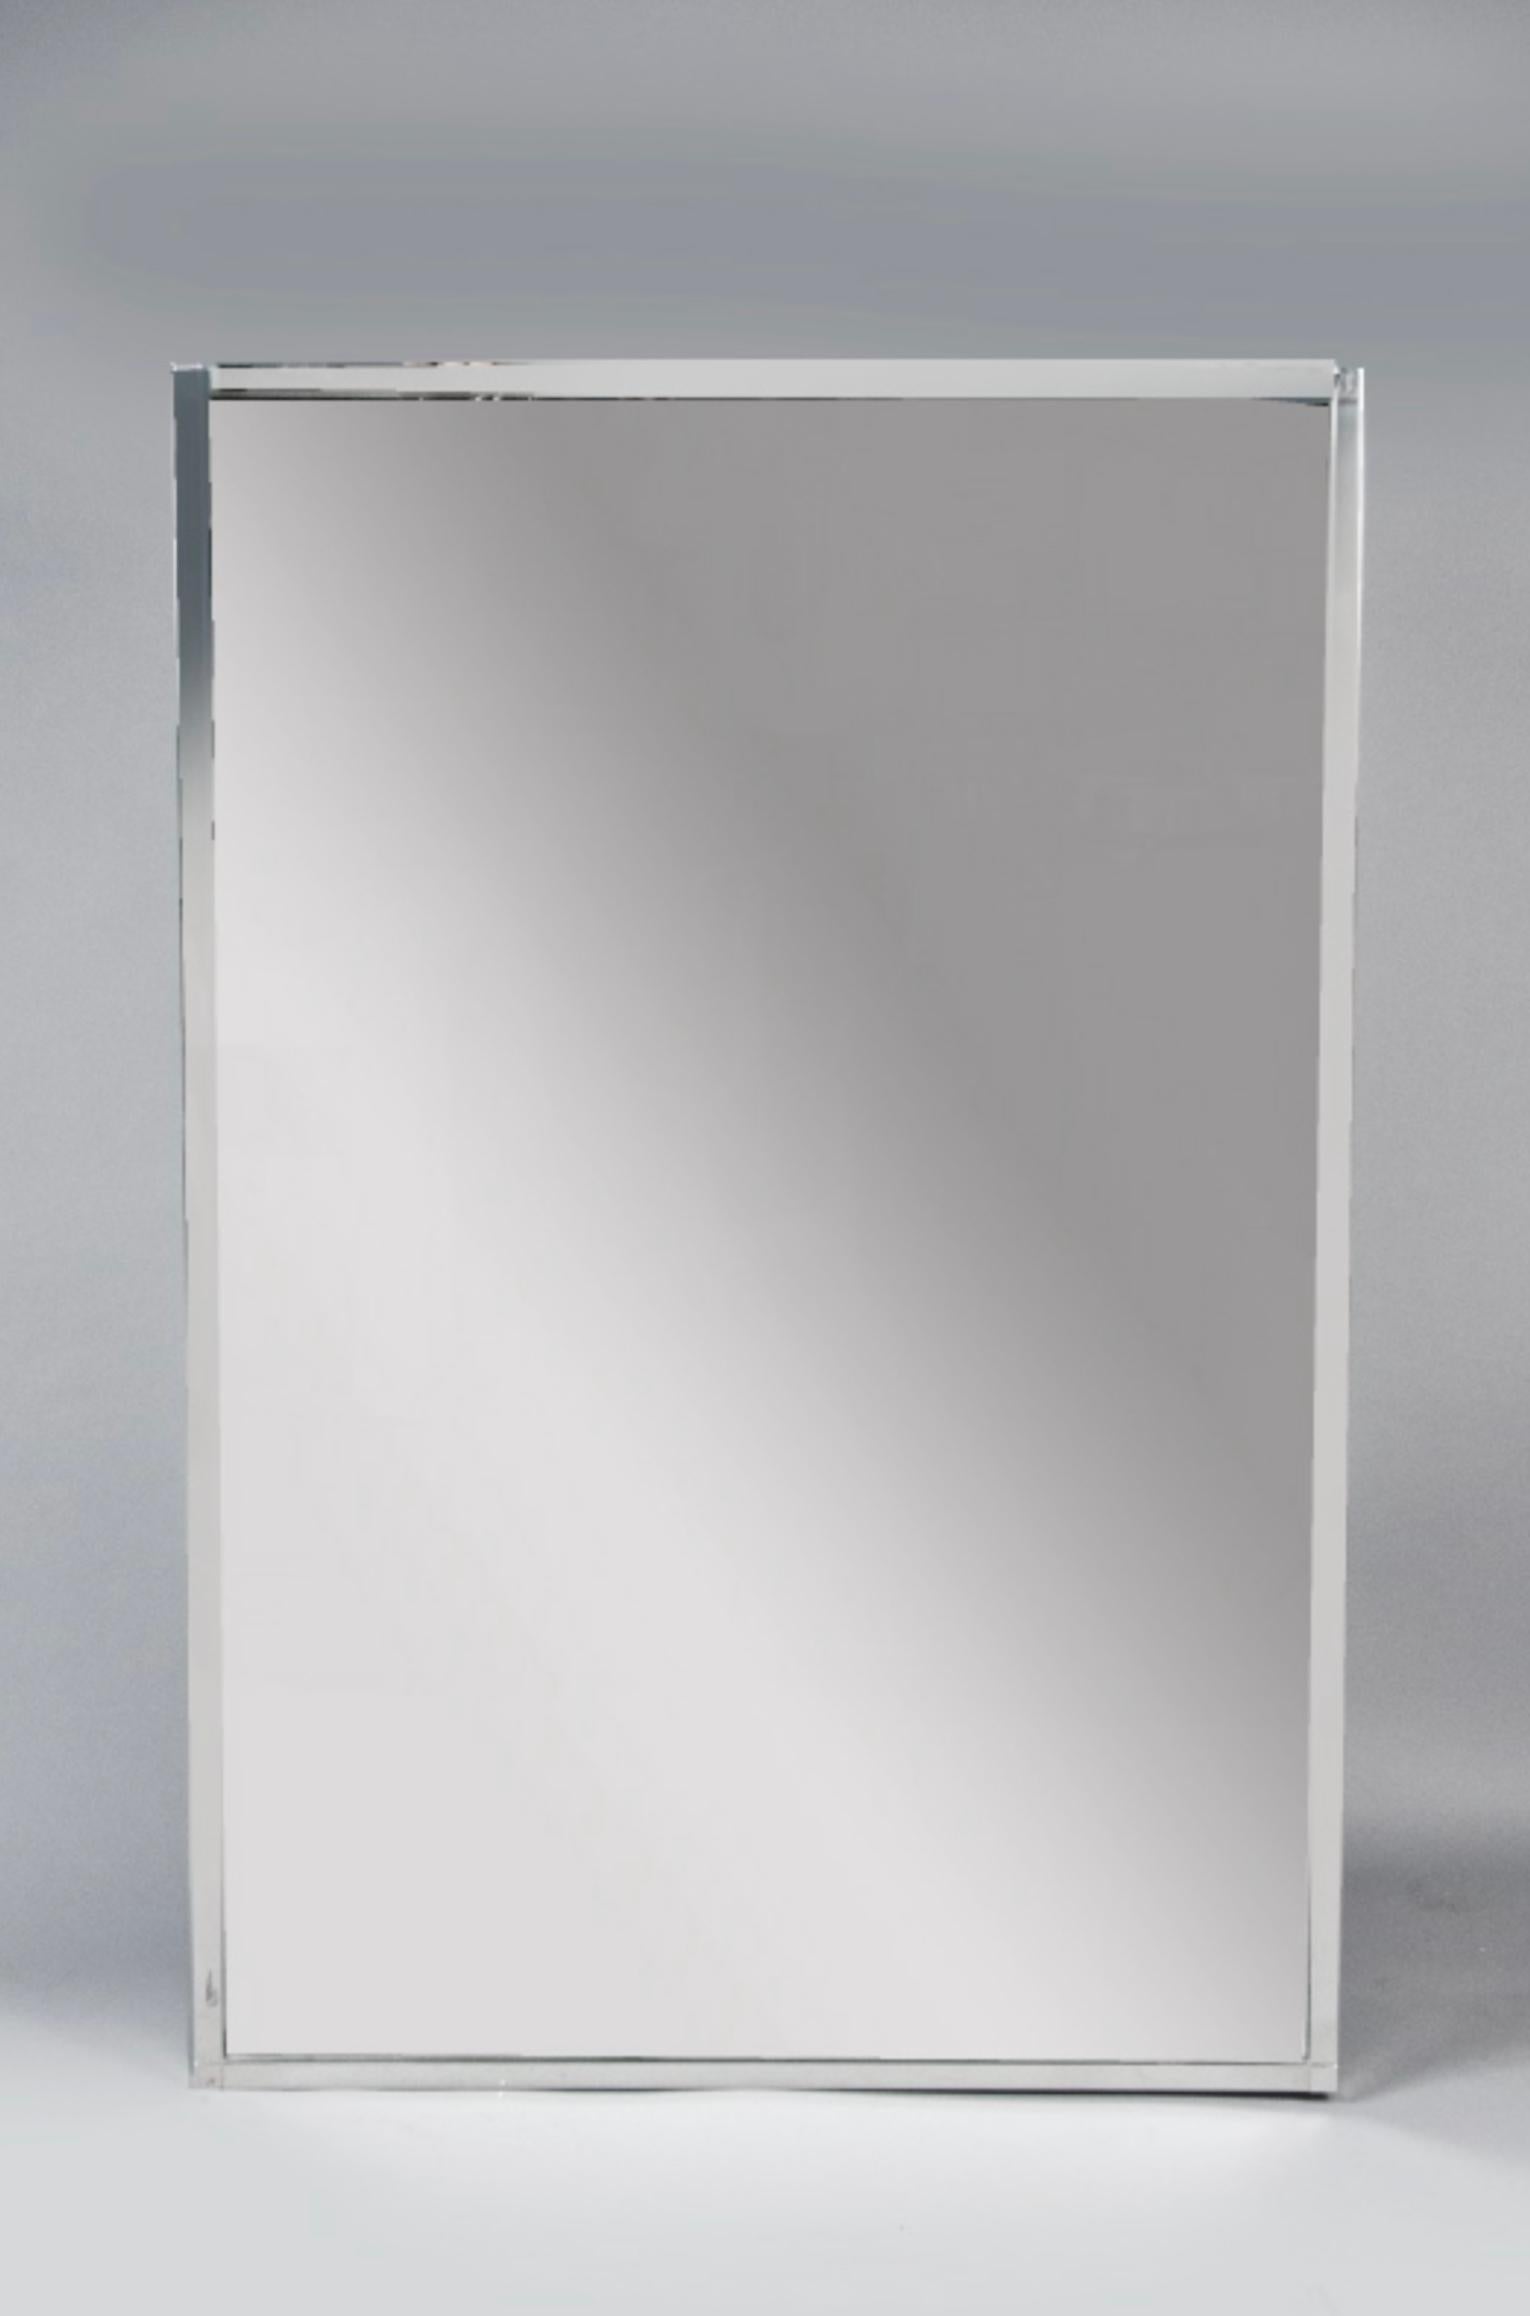 Minimalist nickeled-brass rectangular frame surrounding the original large mirrored glass.

OUR REFERENCE N9181